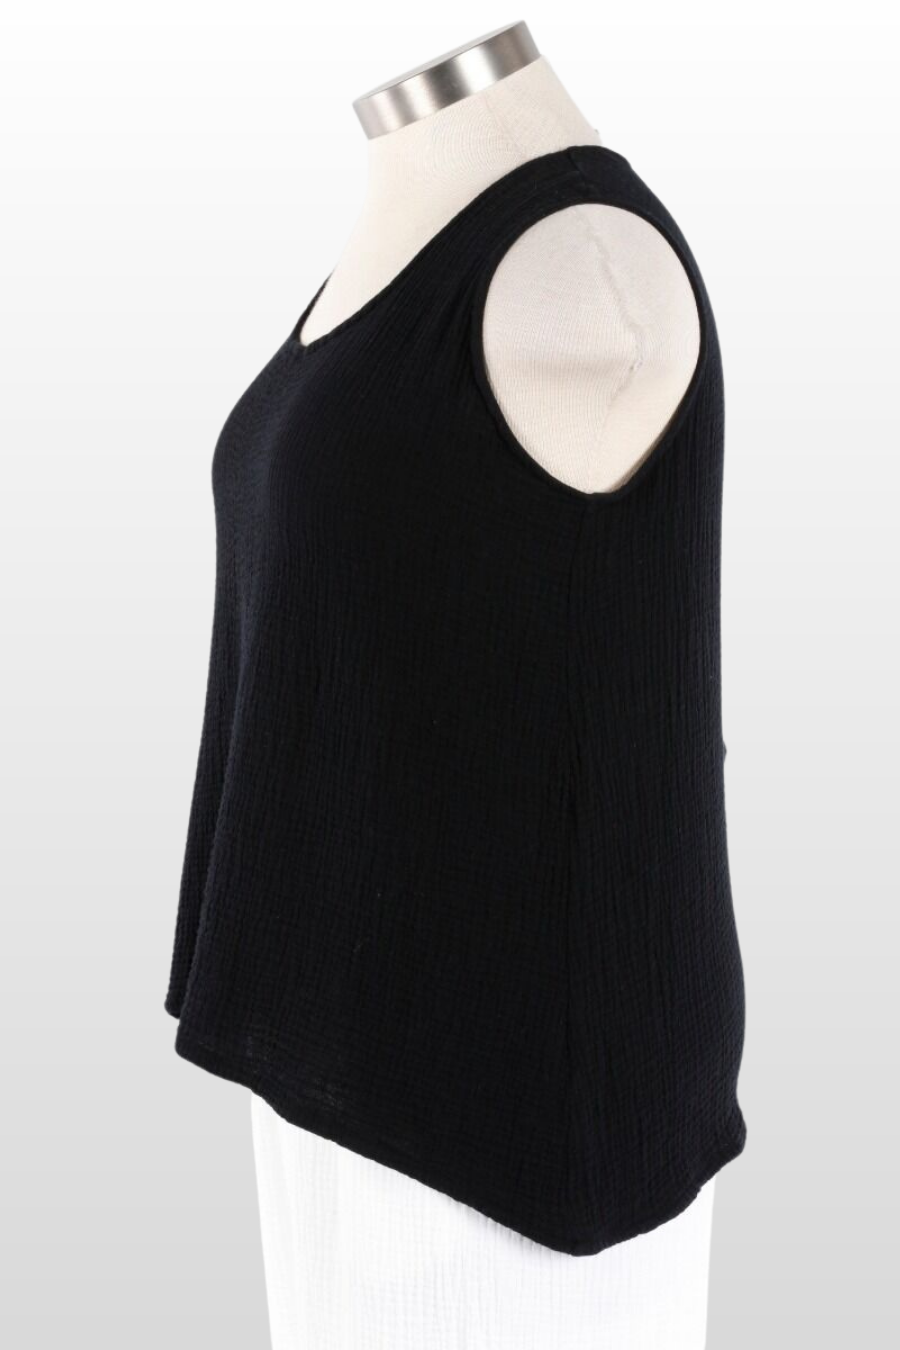 Tank Top with Adjustable Straps – Butter Studio